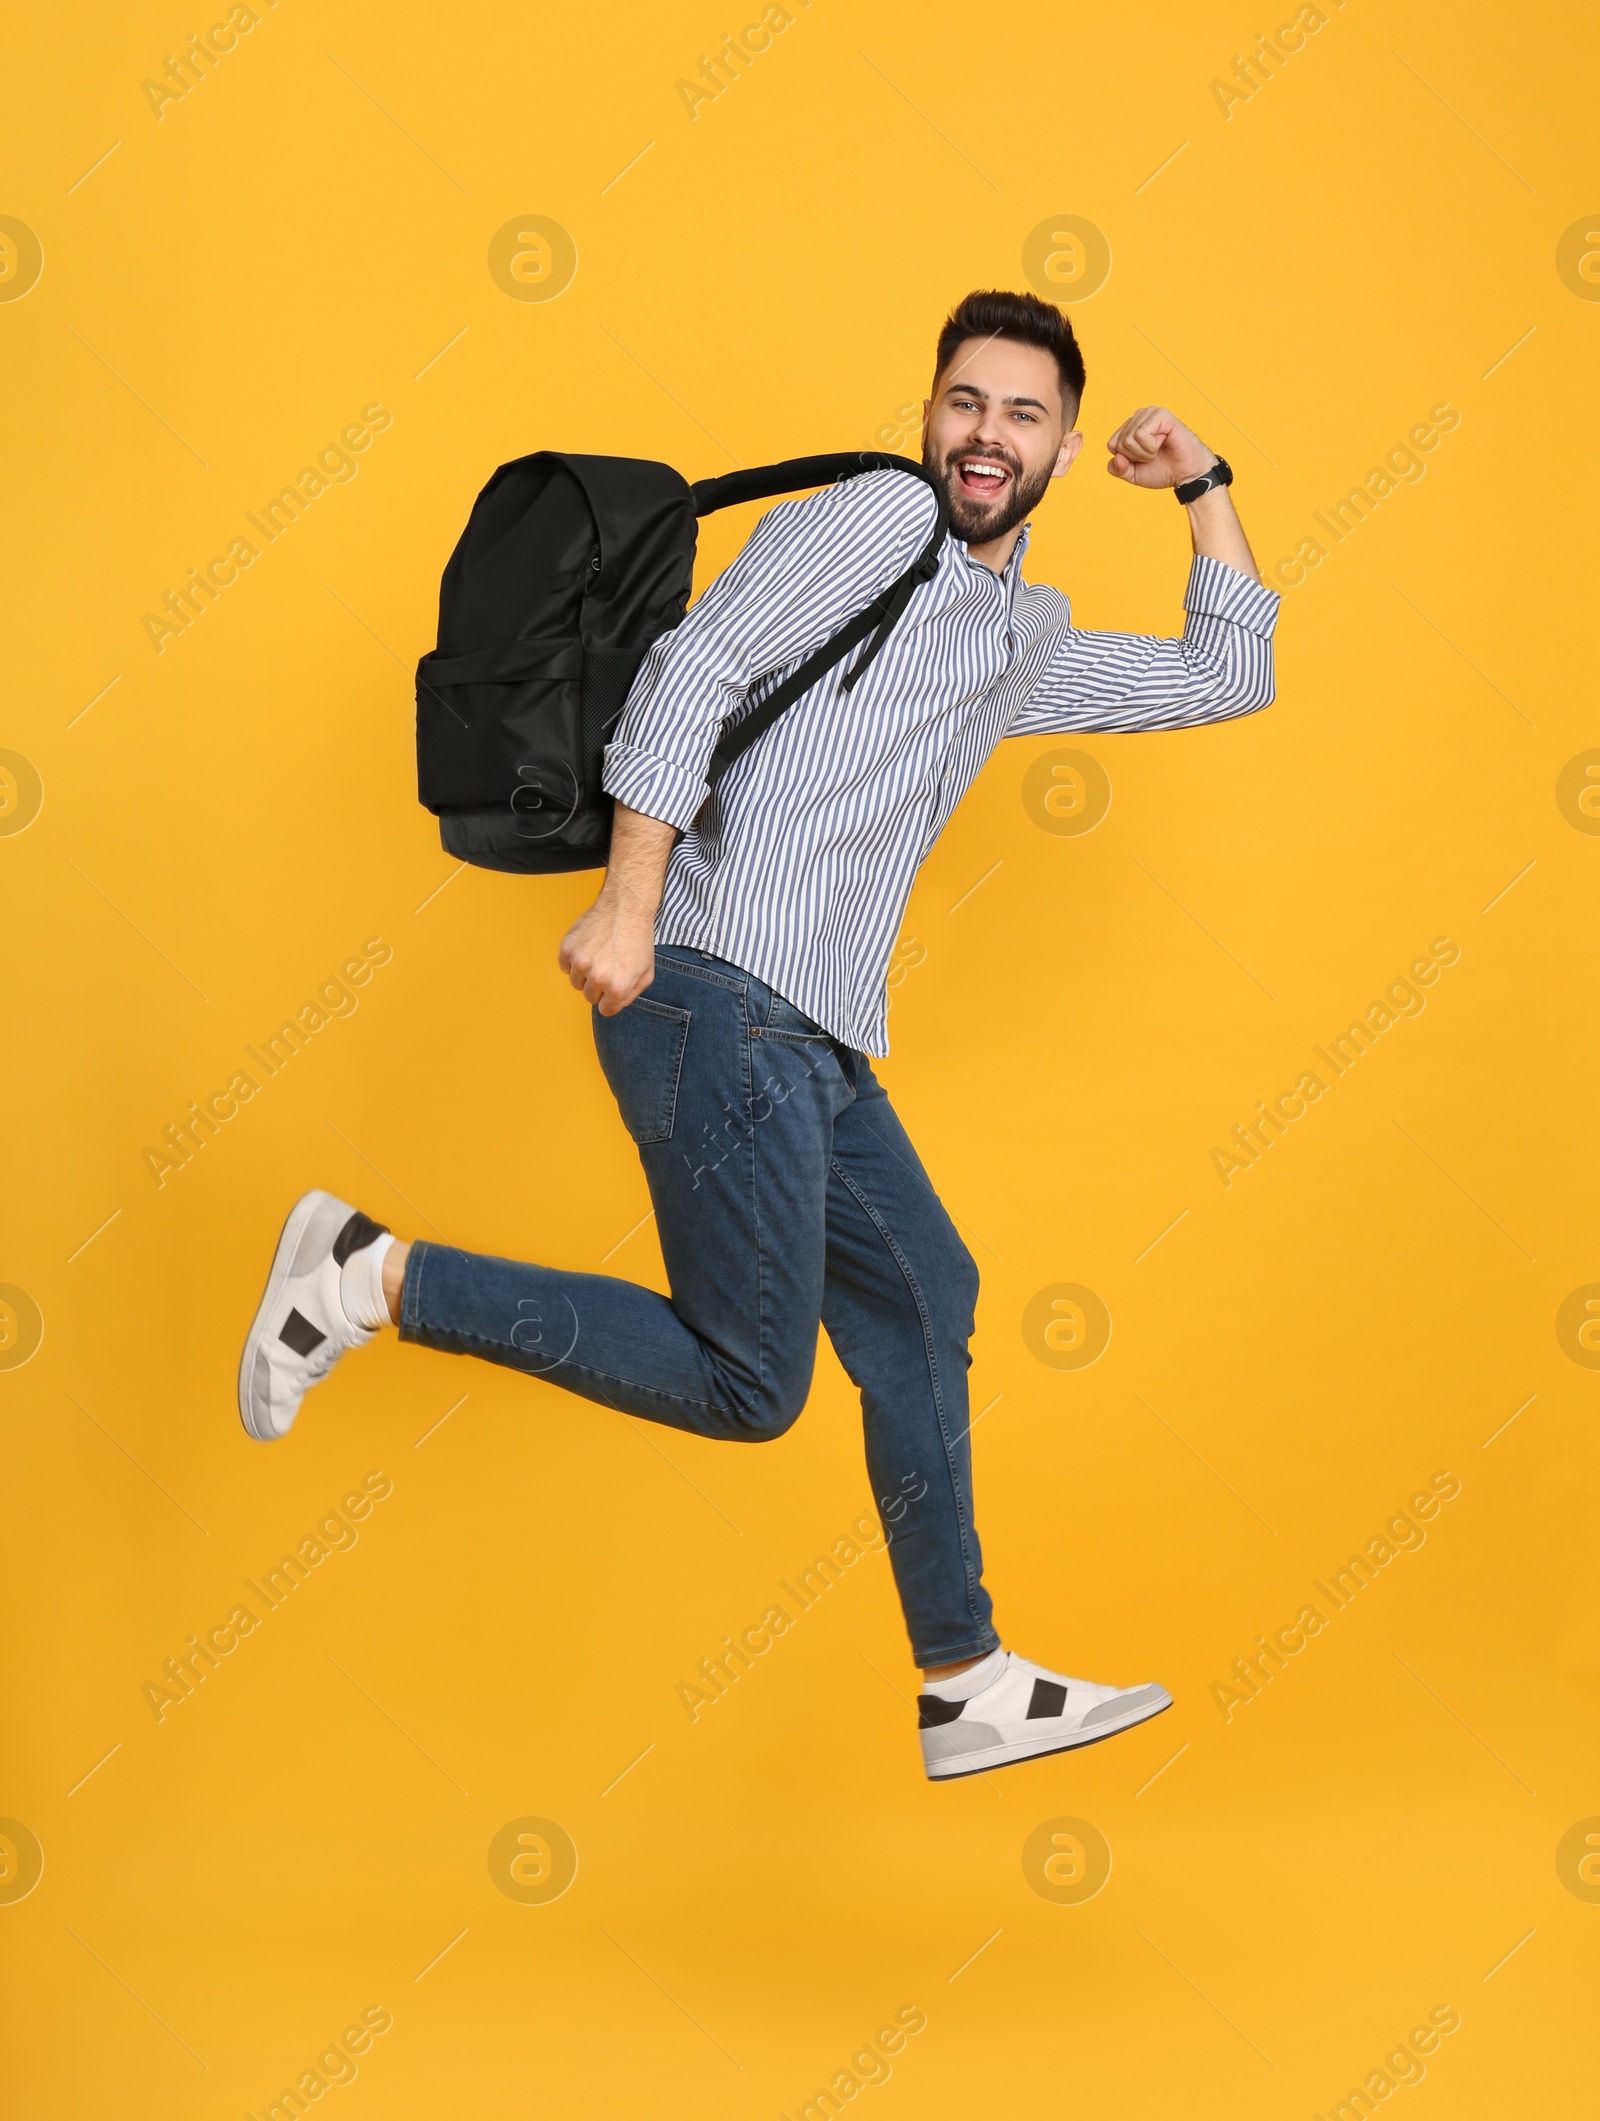 Photo of Emotional man with stylish backpack jumping on yellow background